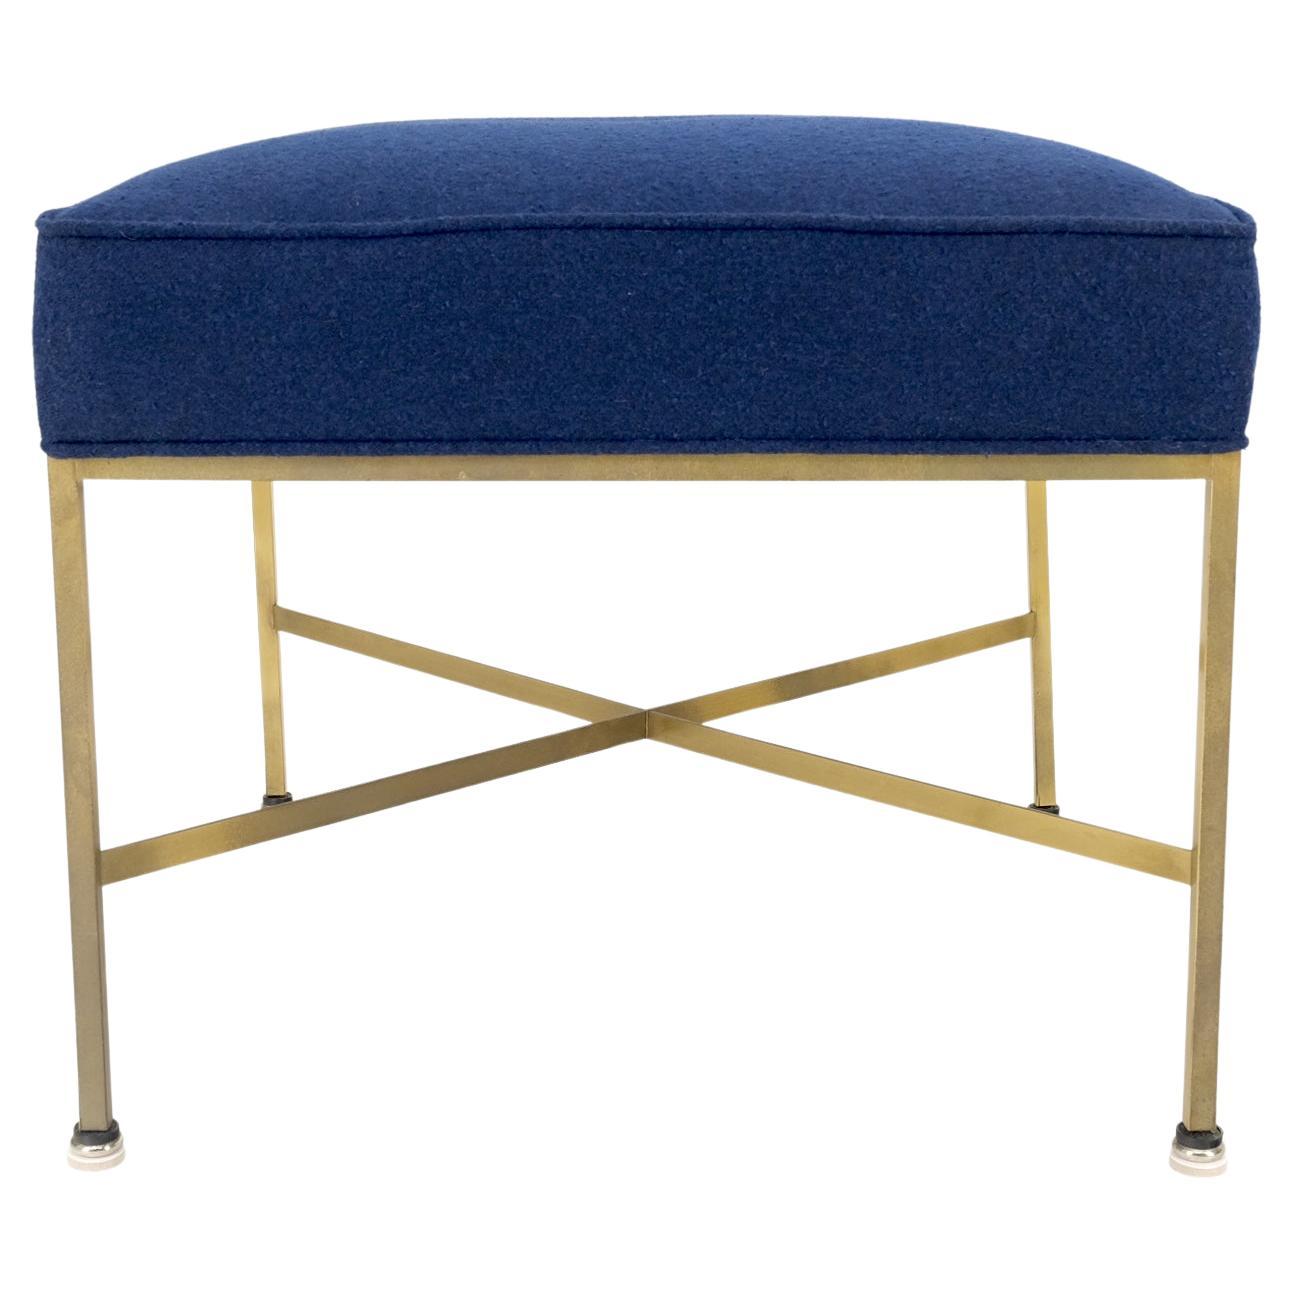 McCobb Square Brass Square Base New Navy Blue Upholstery Bench Stool For Sale